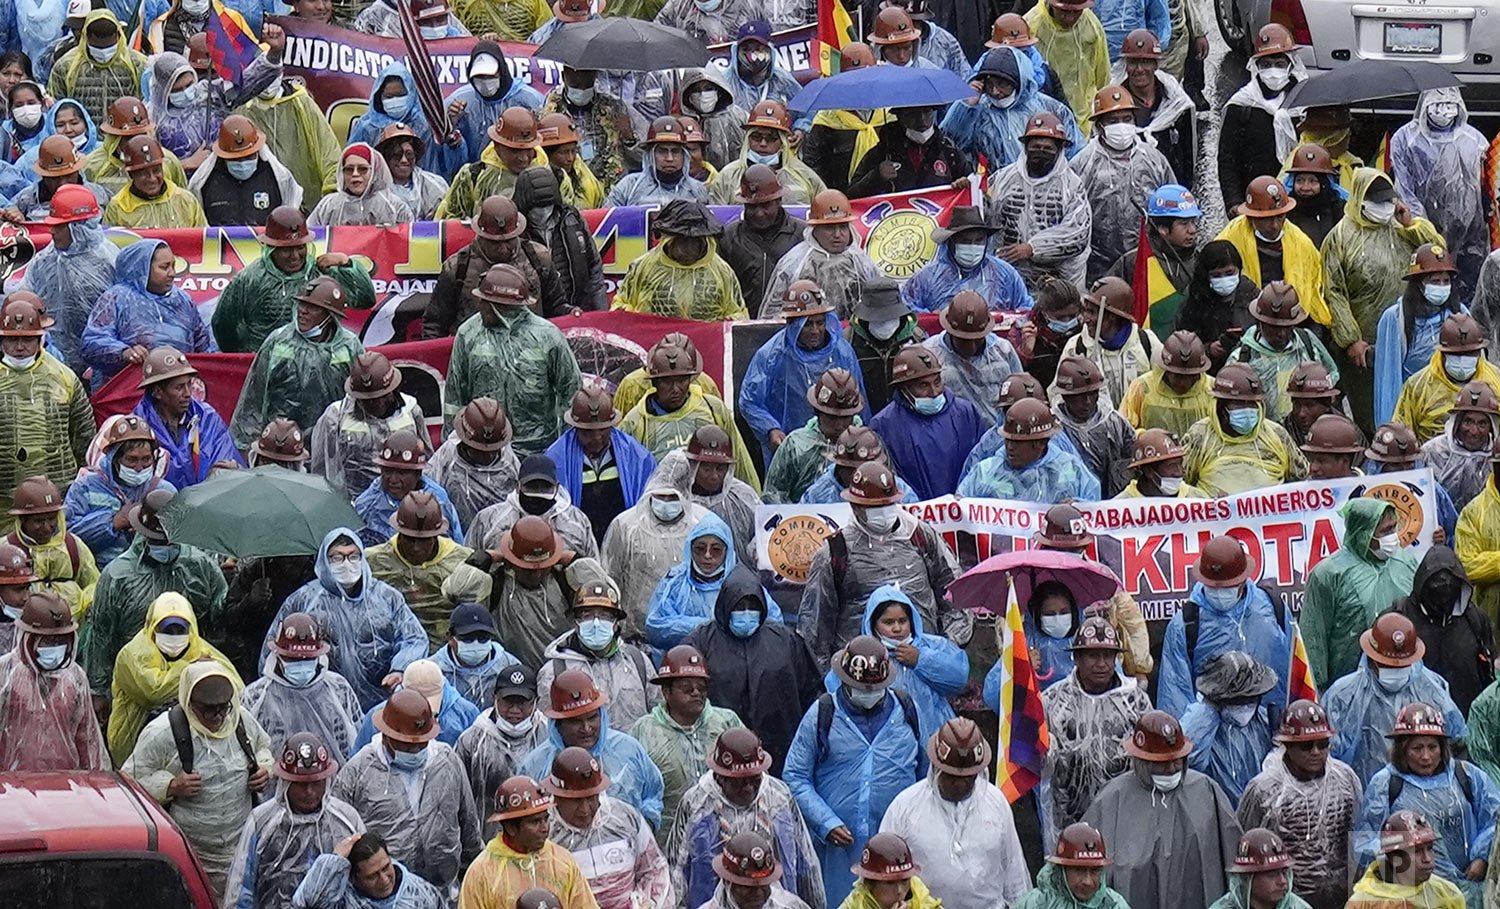  Government supporters take part in the "March for the Homeland," showing support for President Luis Are, in La Paz, Bolivia, Monday, Nov. 29, 2021. (AP Photo/Juan Karita) 